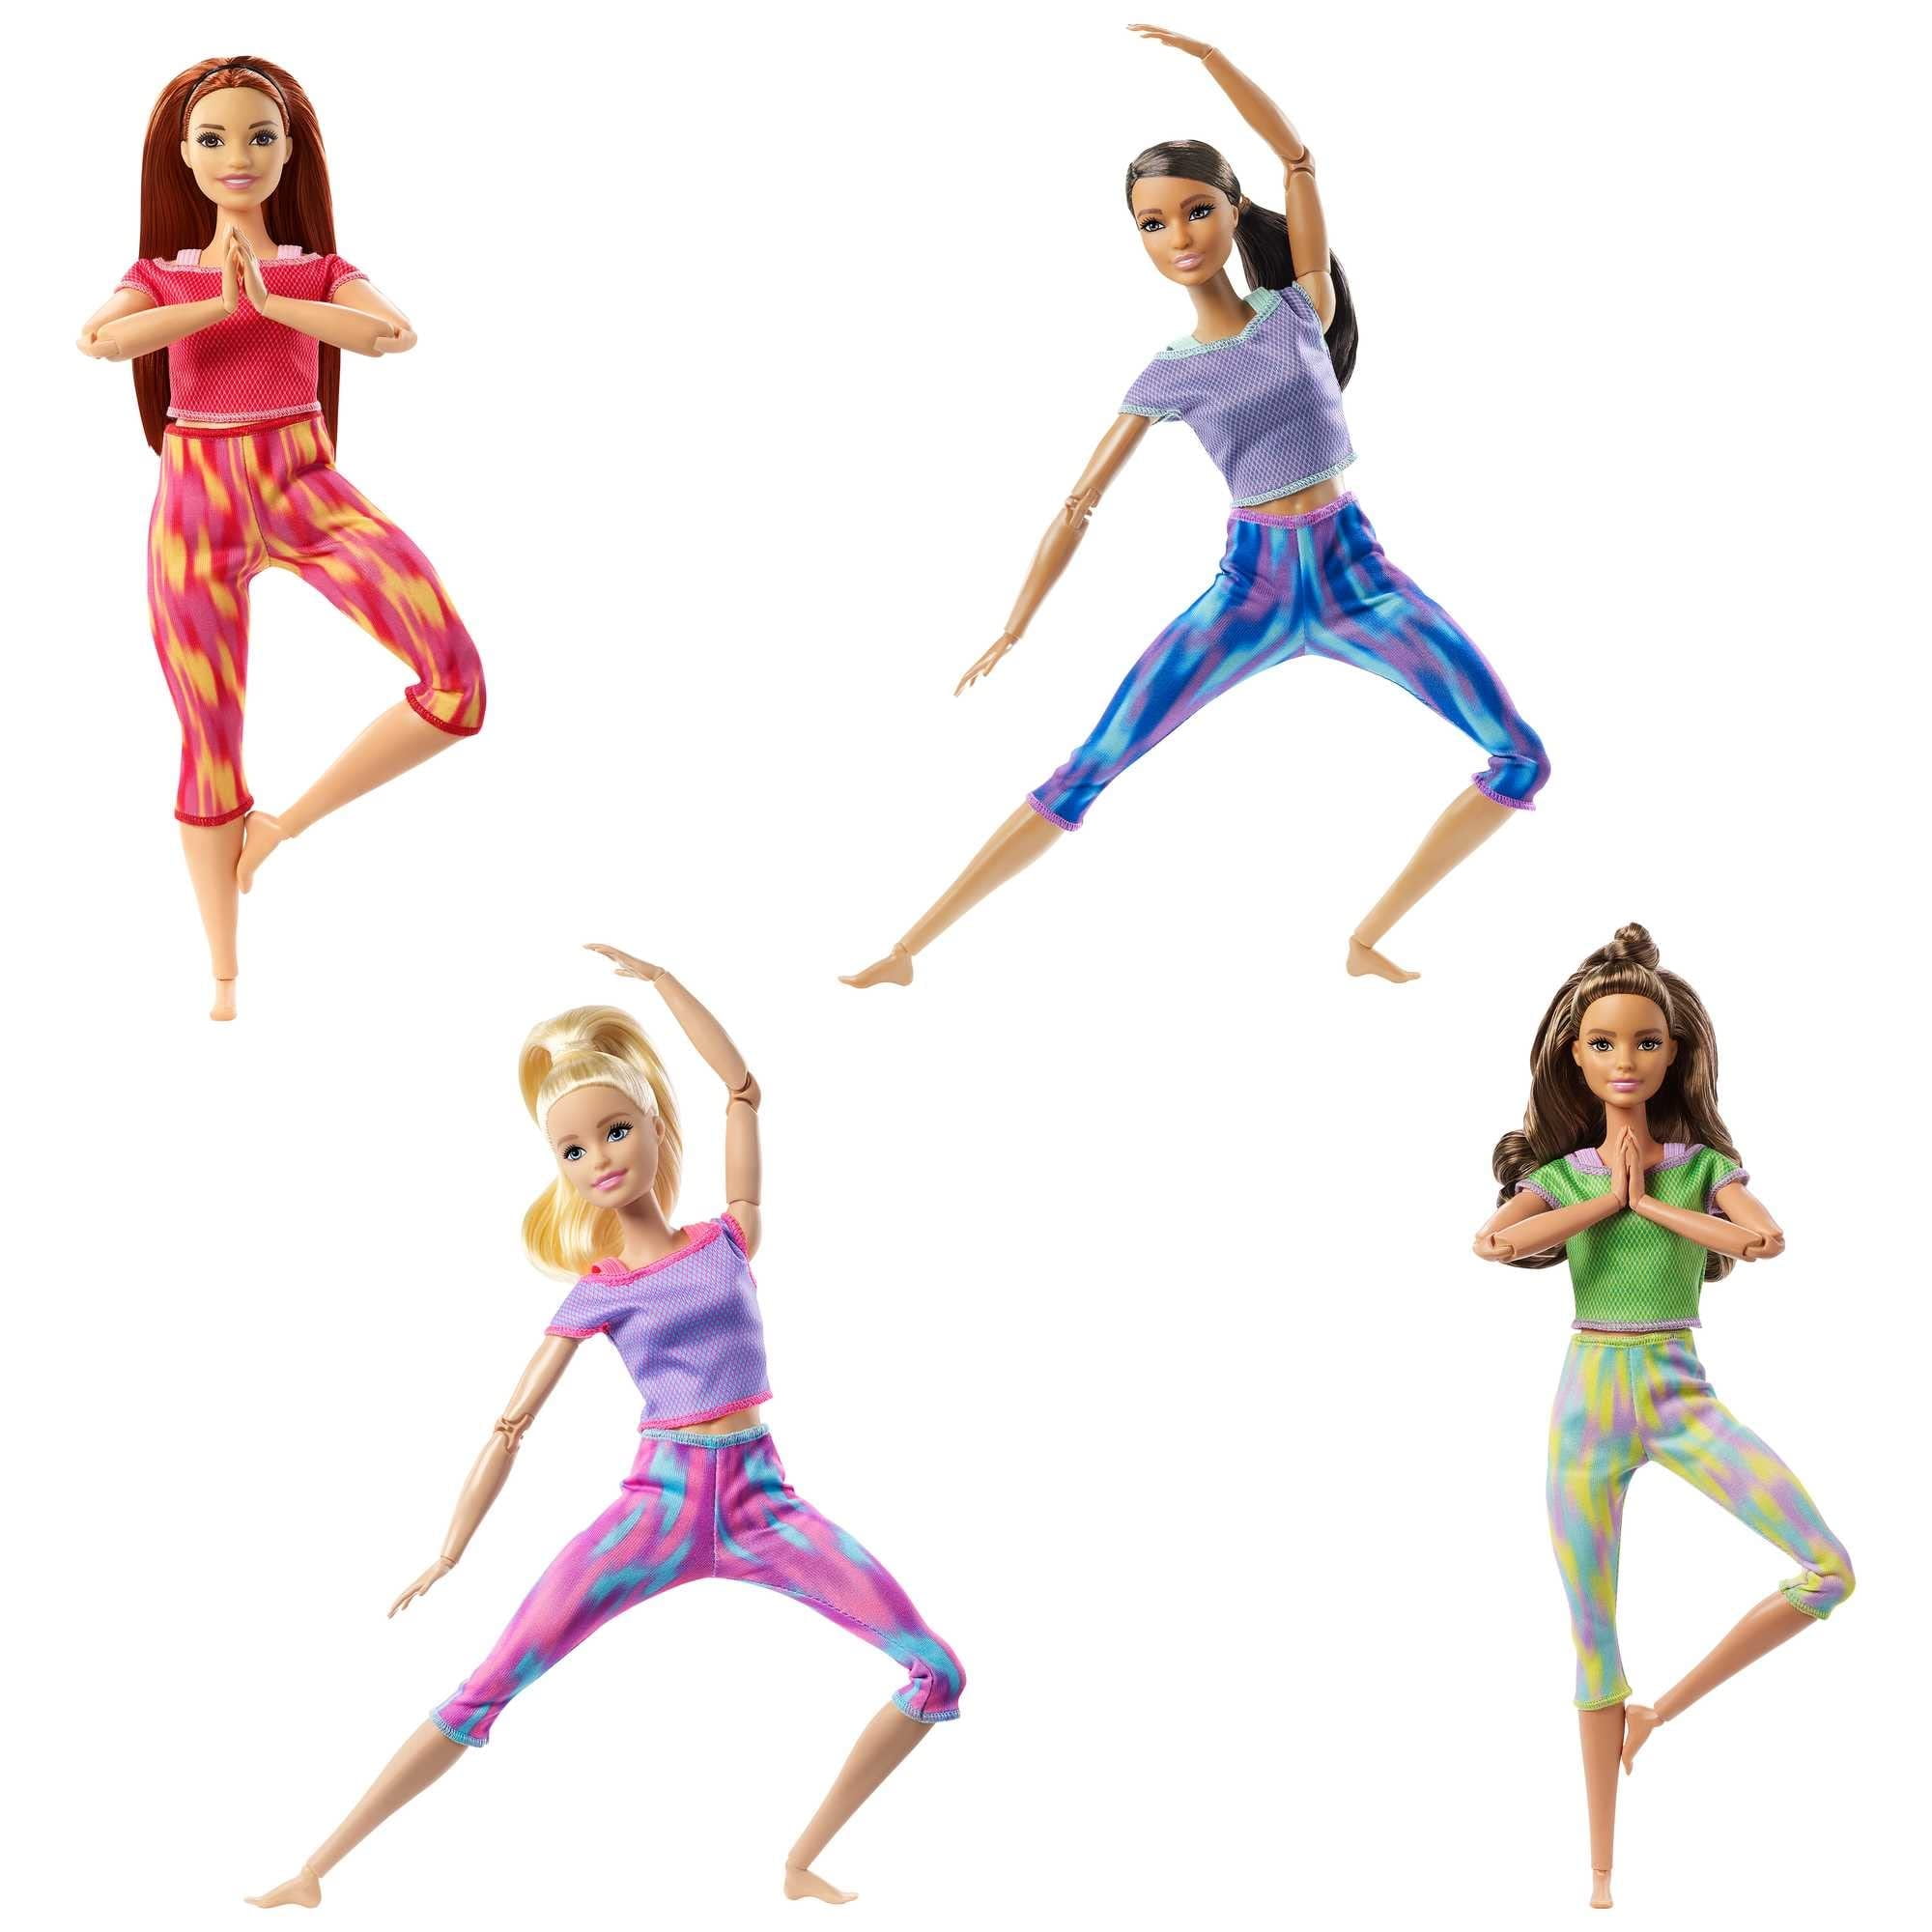 Barbie Made to Move Doll with 22 Flexible Joints & Curly Brunette